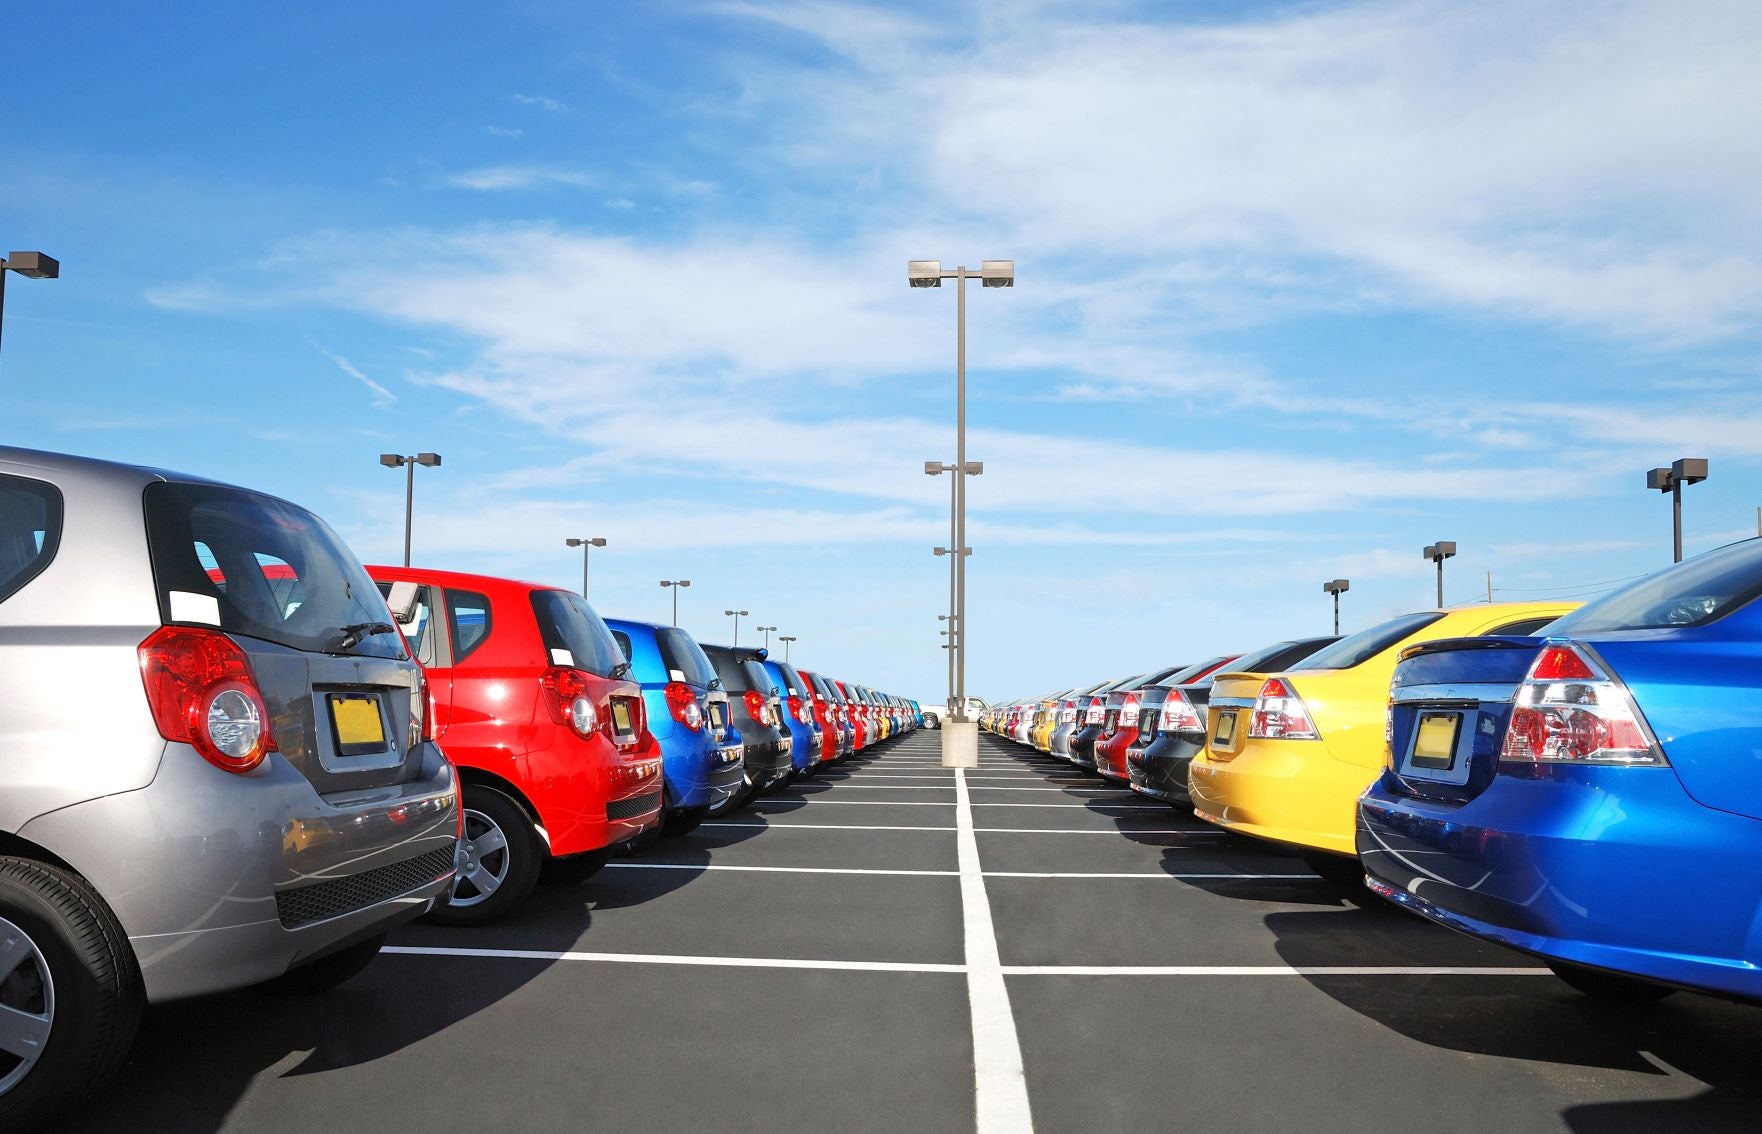 Contact Used Car Dealer in Milwaukie, OR